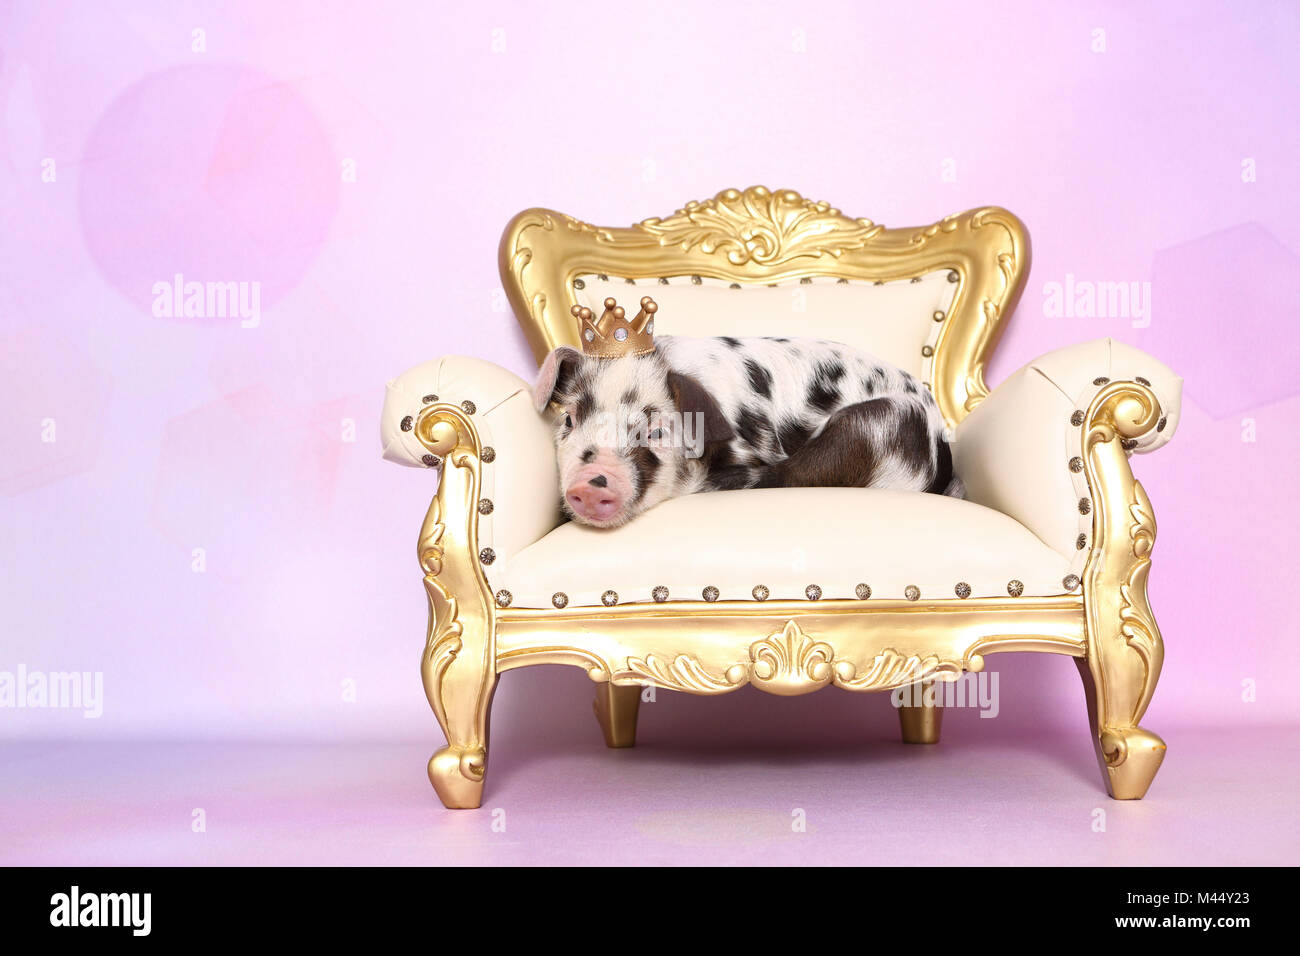 Domestic Pig, Turopolje x ?. Piglet (4 weeks old) on an antique armchair, wearing a crown. Studio picture seen against a pink background. Germany Stock Photo